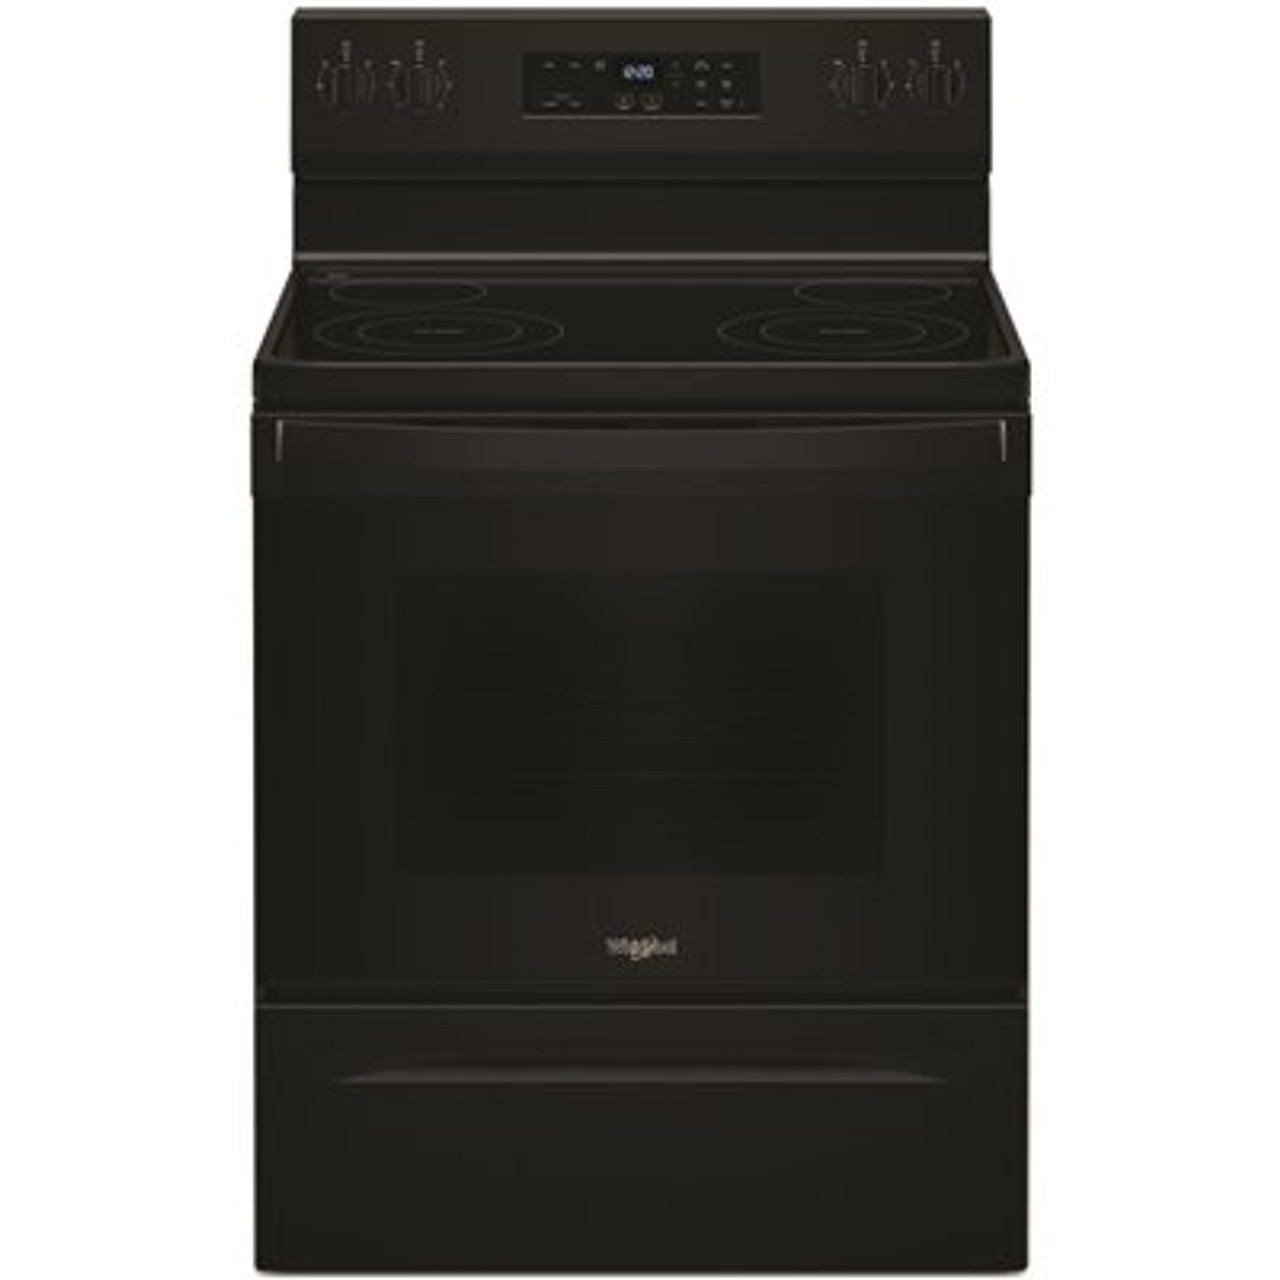 WHIRLPOOL 30-Inch,5.3 Cubic Feet Electric Freestanding Range Wfes3030rb